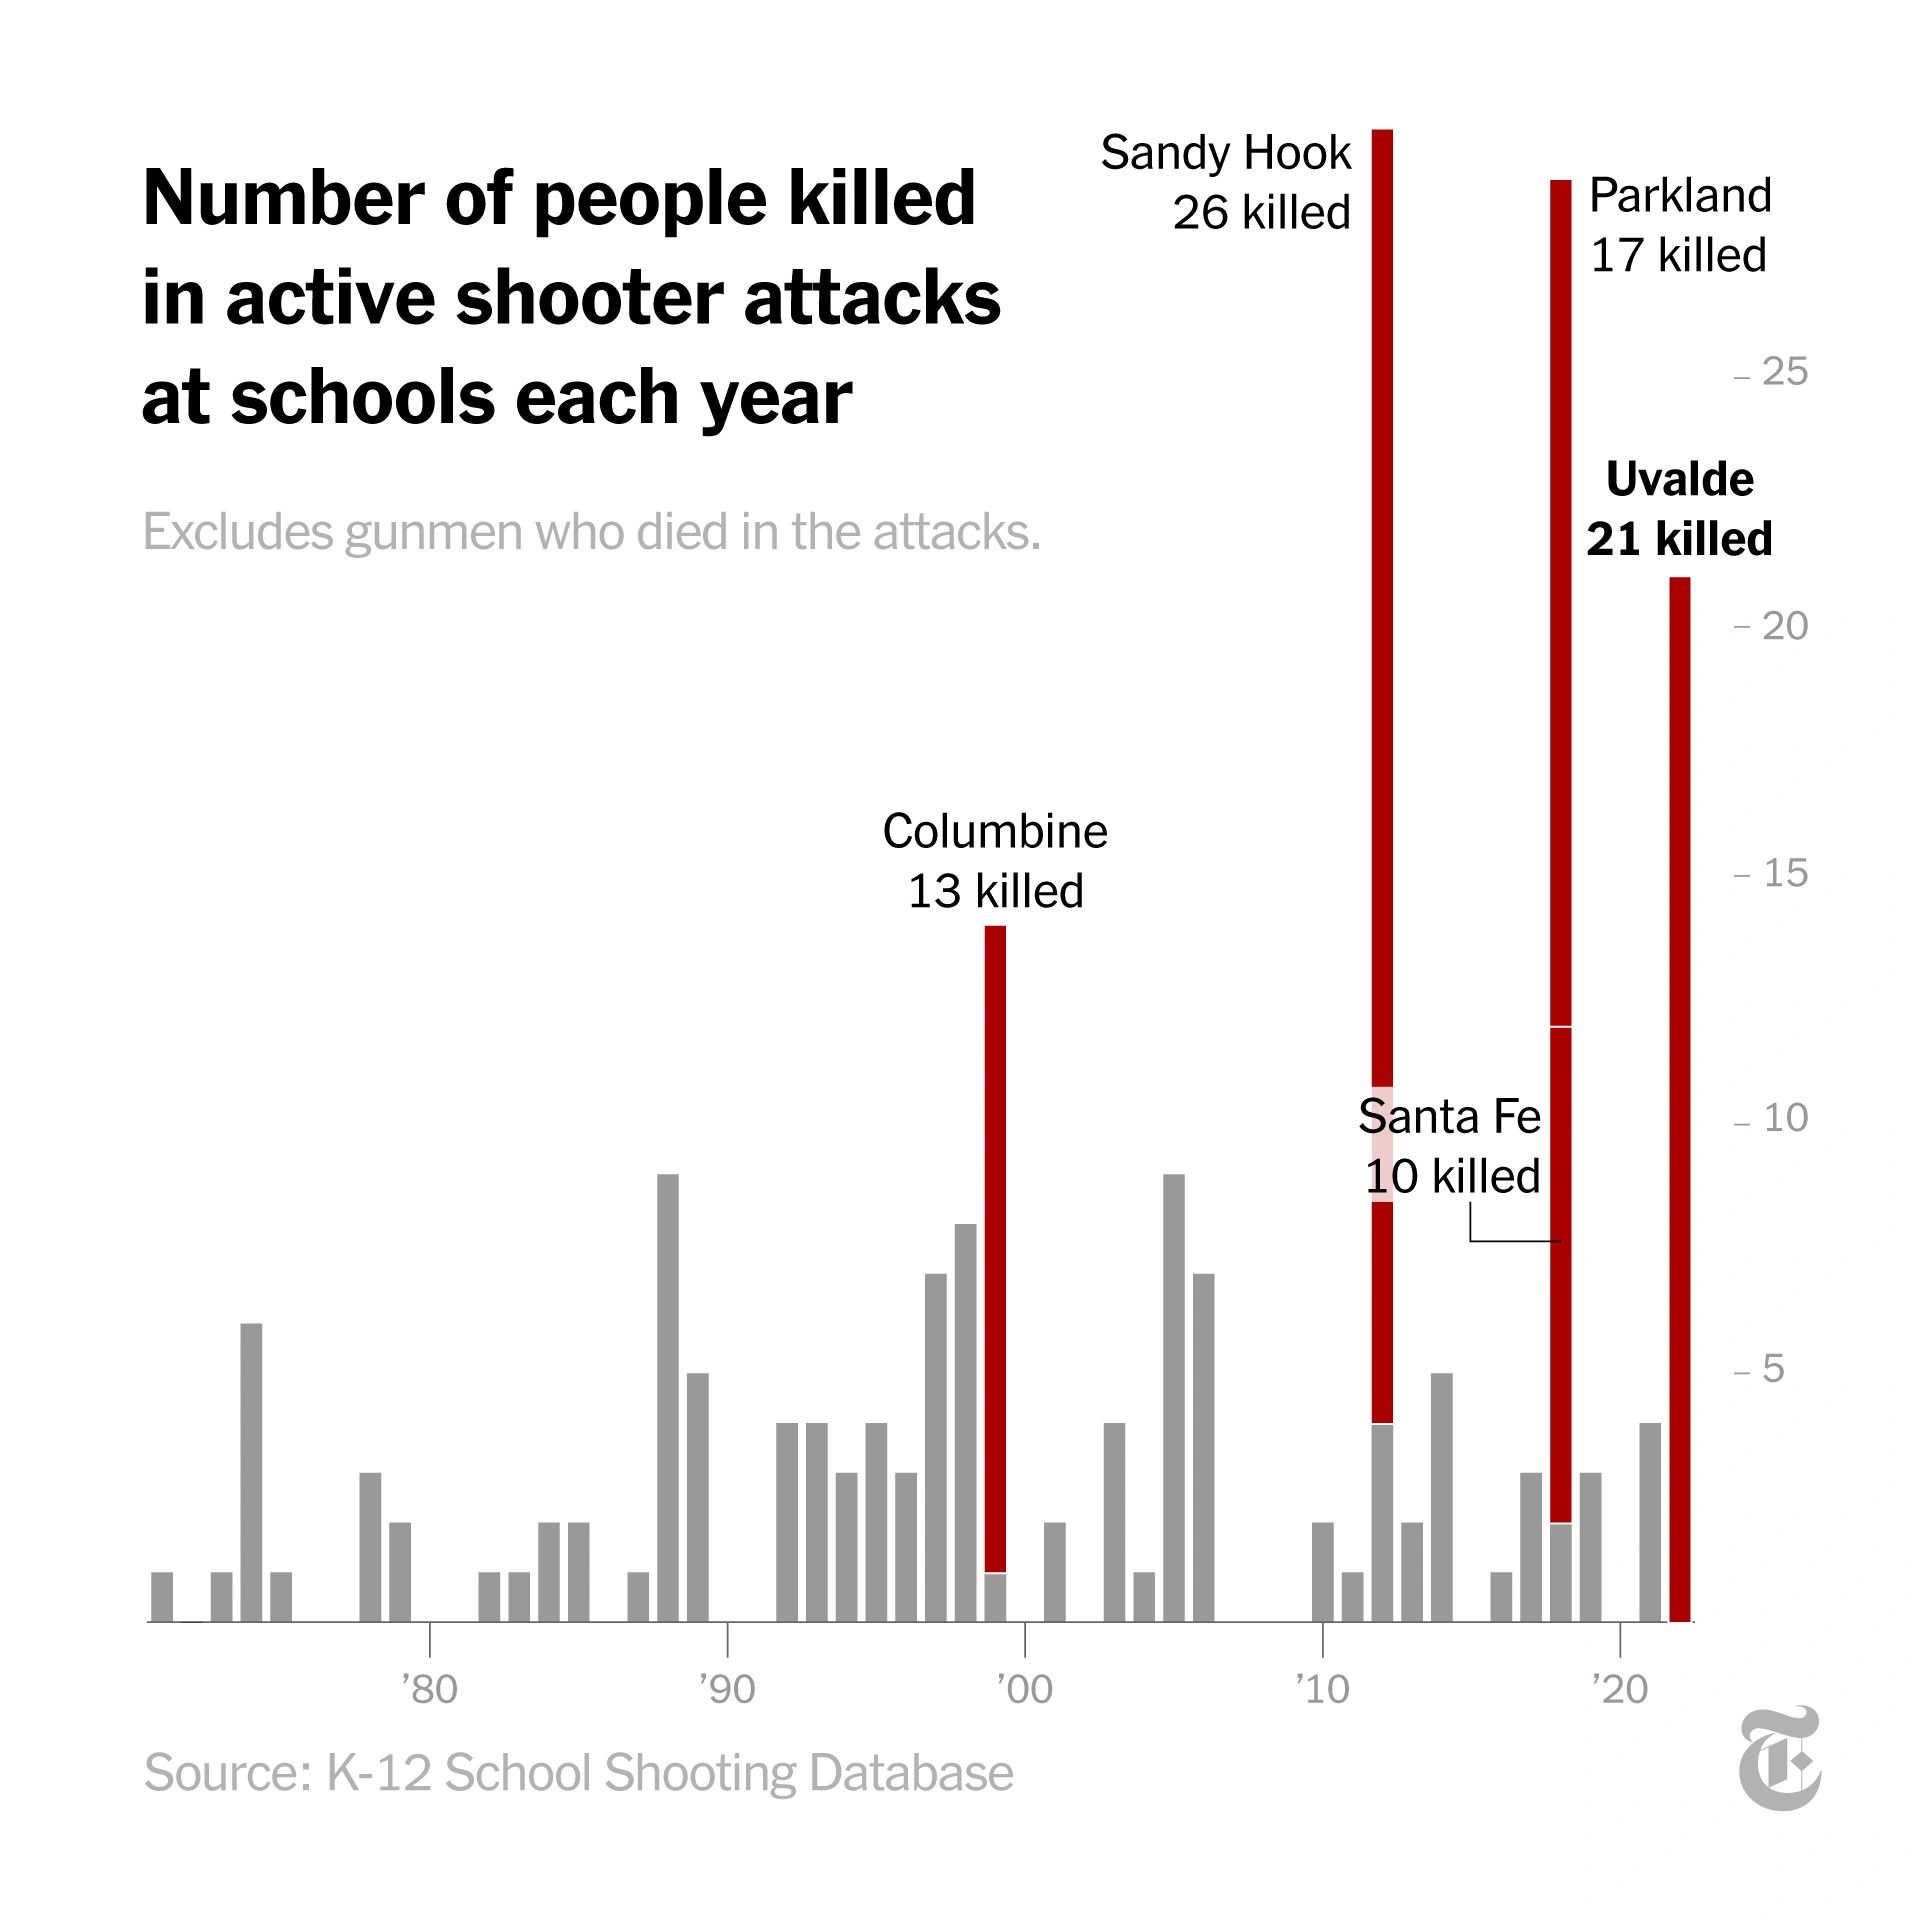 All shootings at schools includes when a gun is brandished, is fired, or a bullet hits school property for any reason, regardless of the number of vic